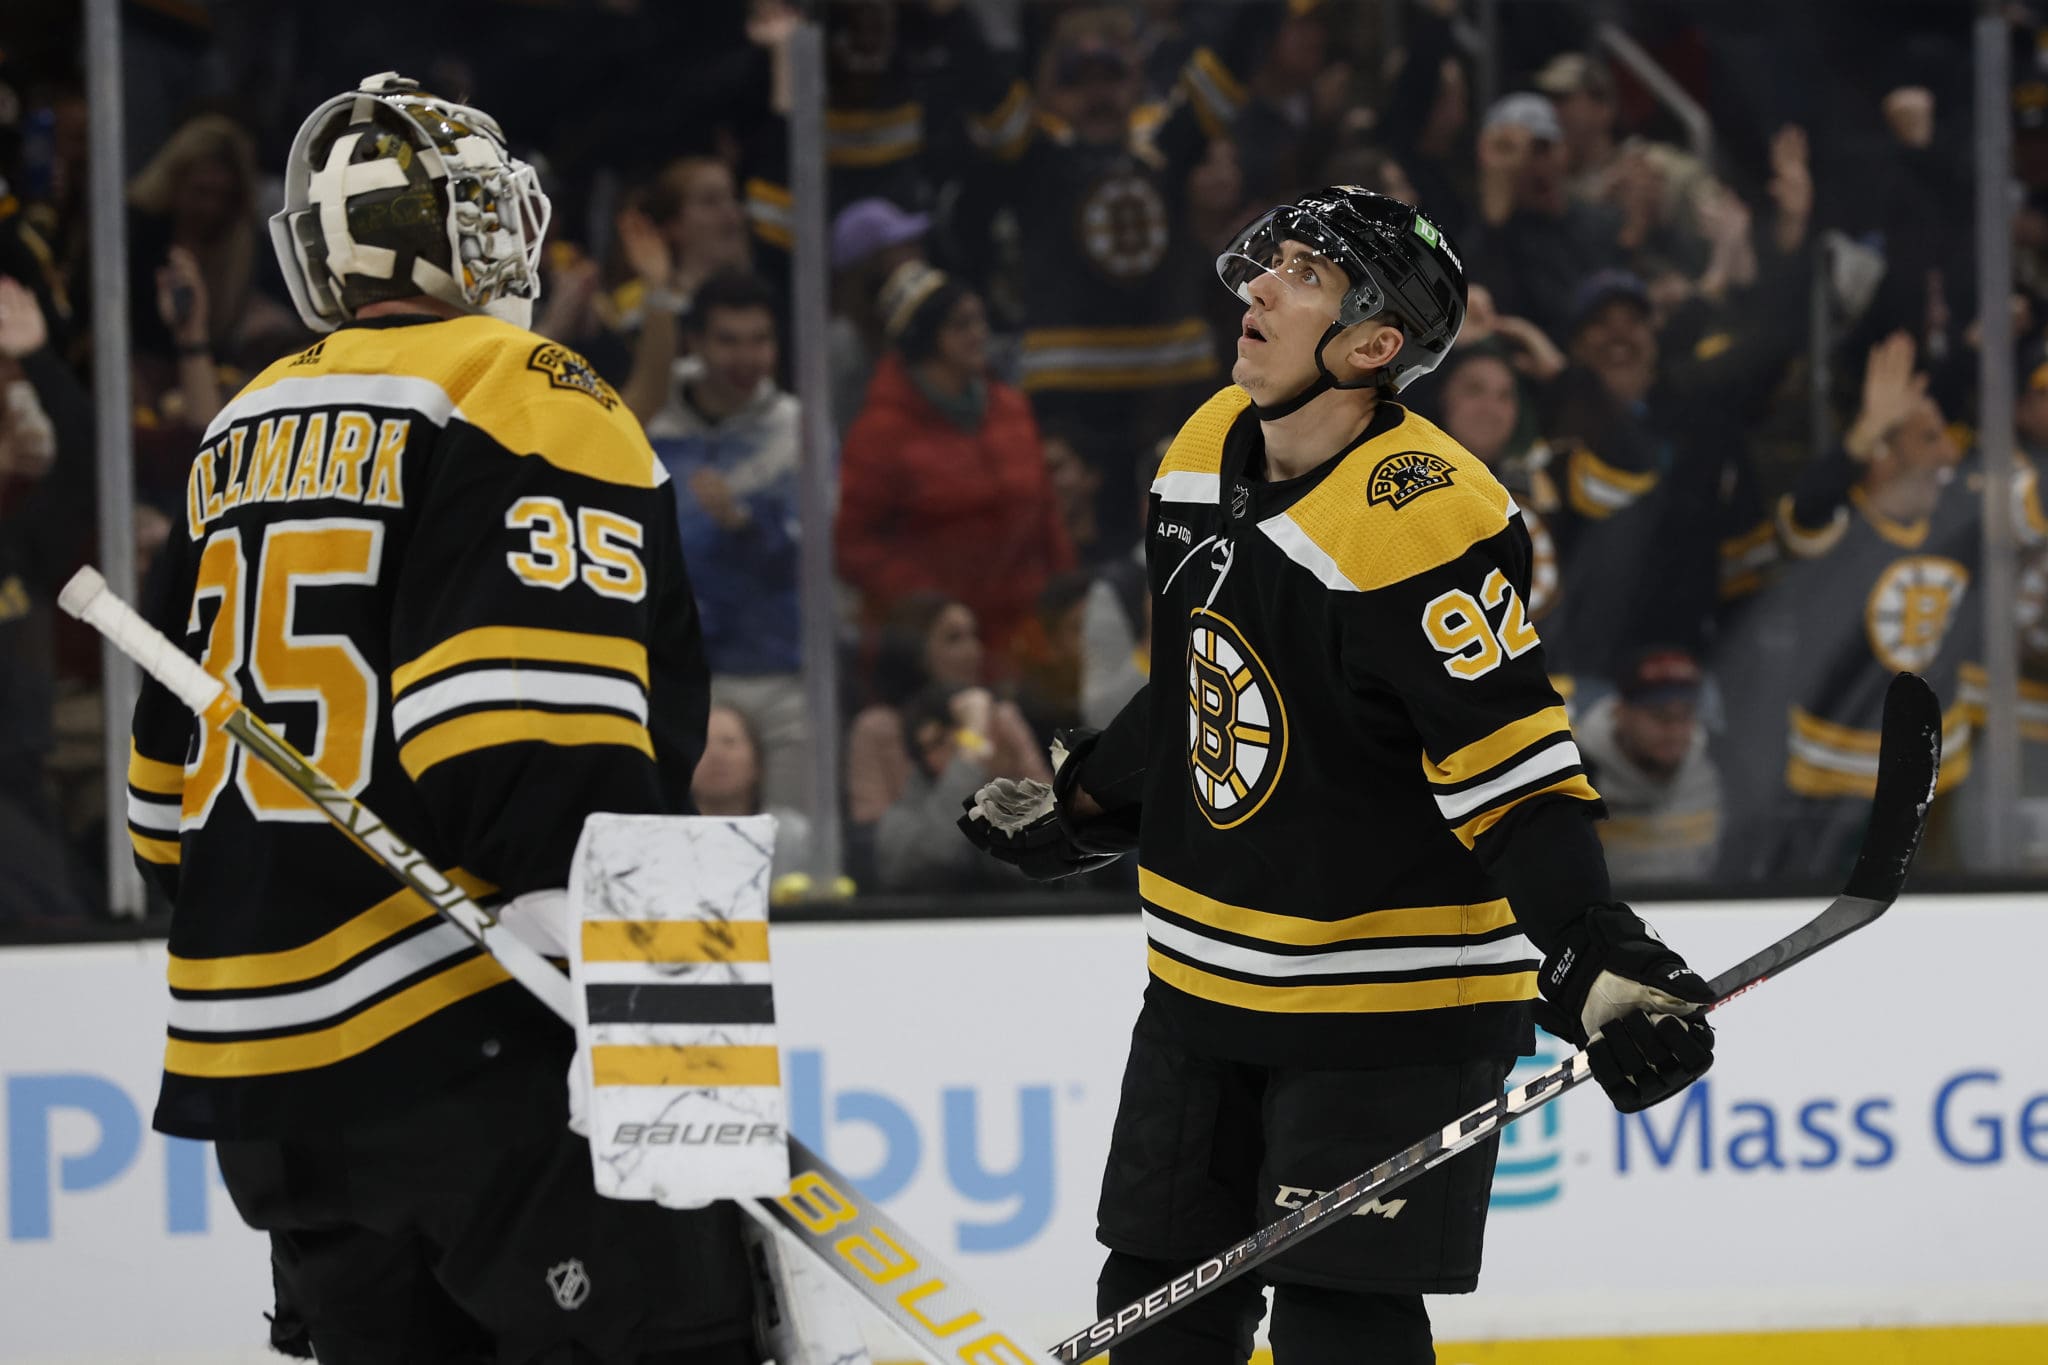 Tomas Nosek Departs Bruins, Signs One-Year Deal With Devils